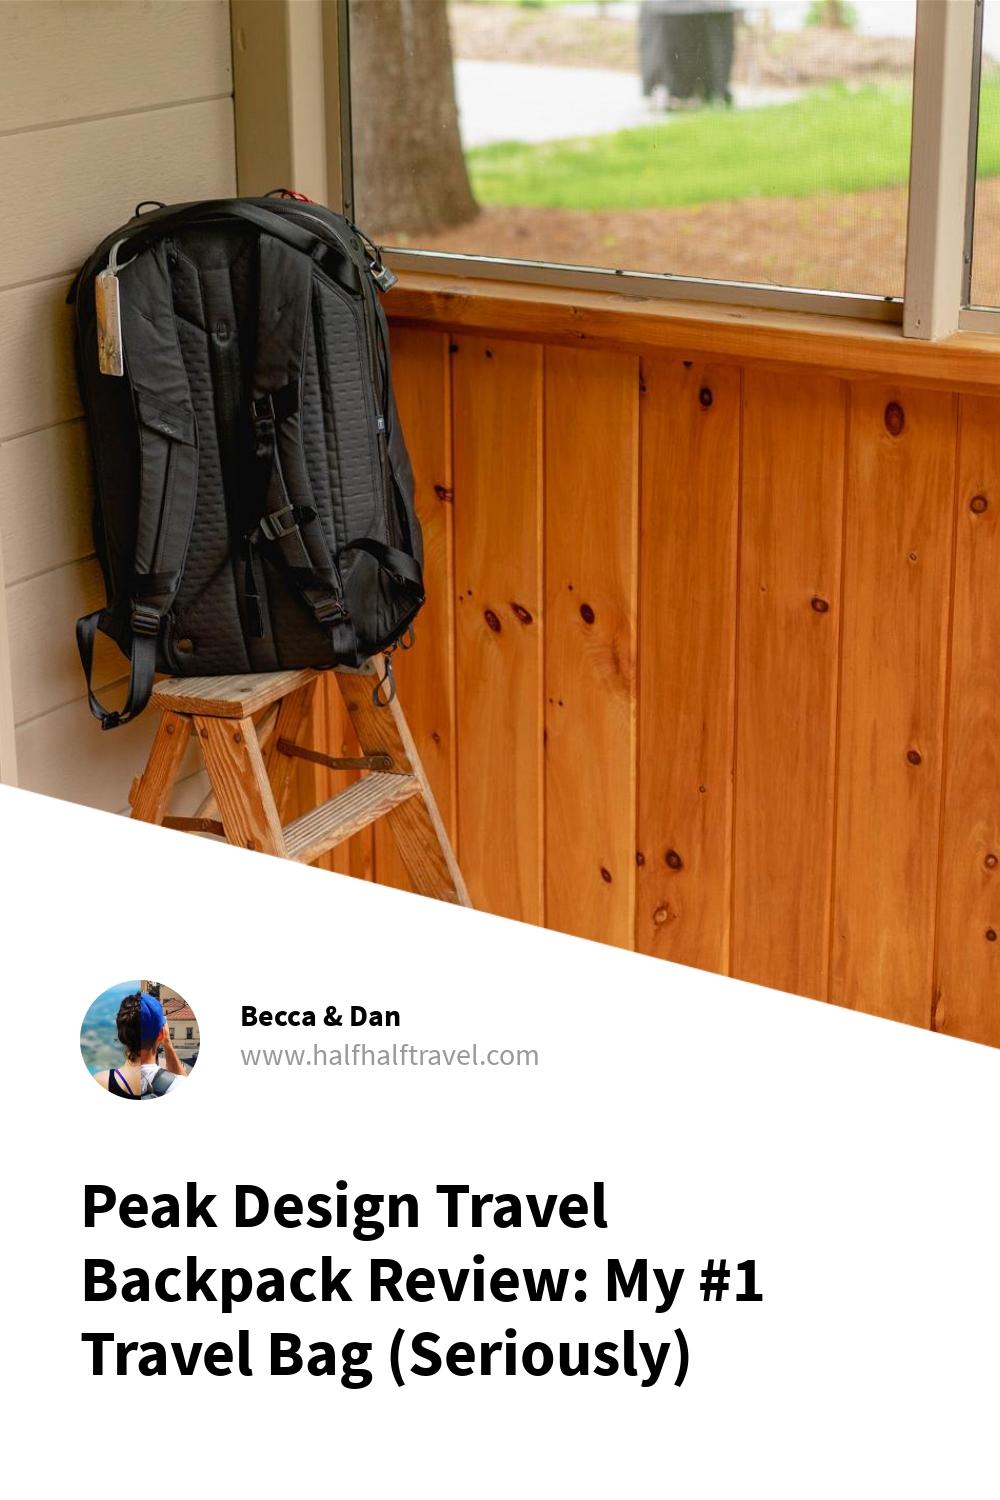 Pinterest image from the 'Peak Design Travel Backpack Review: My #1 Travel Bag (Seriously)' article on Half Half Travel